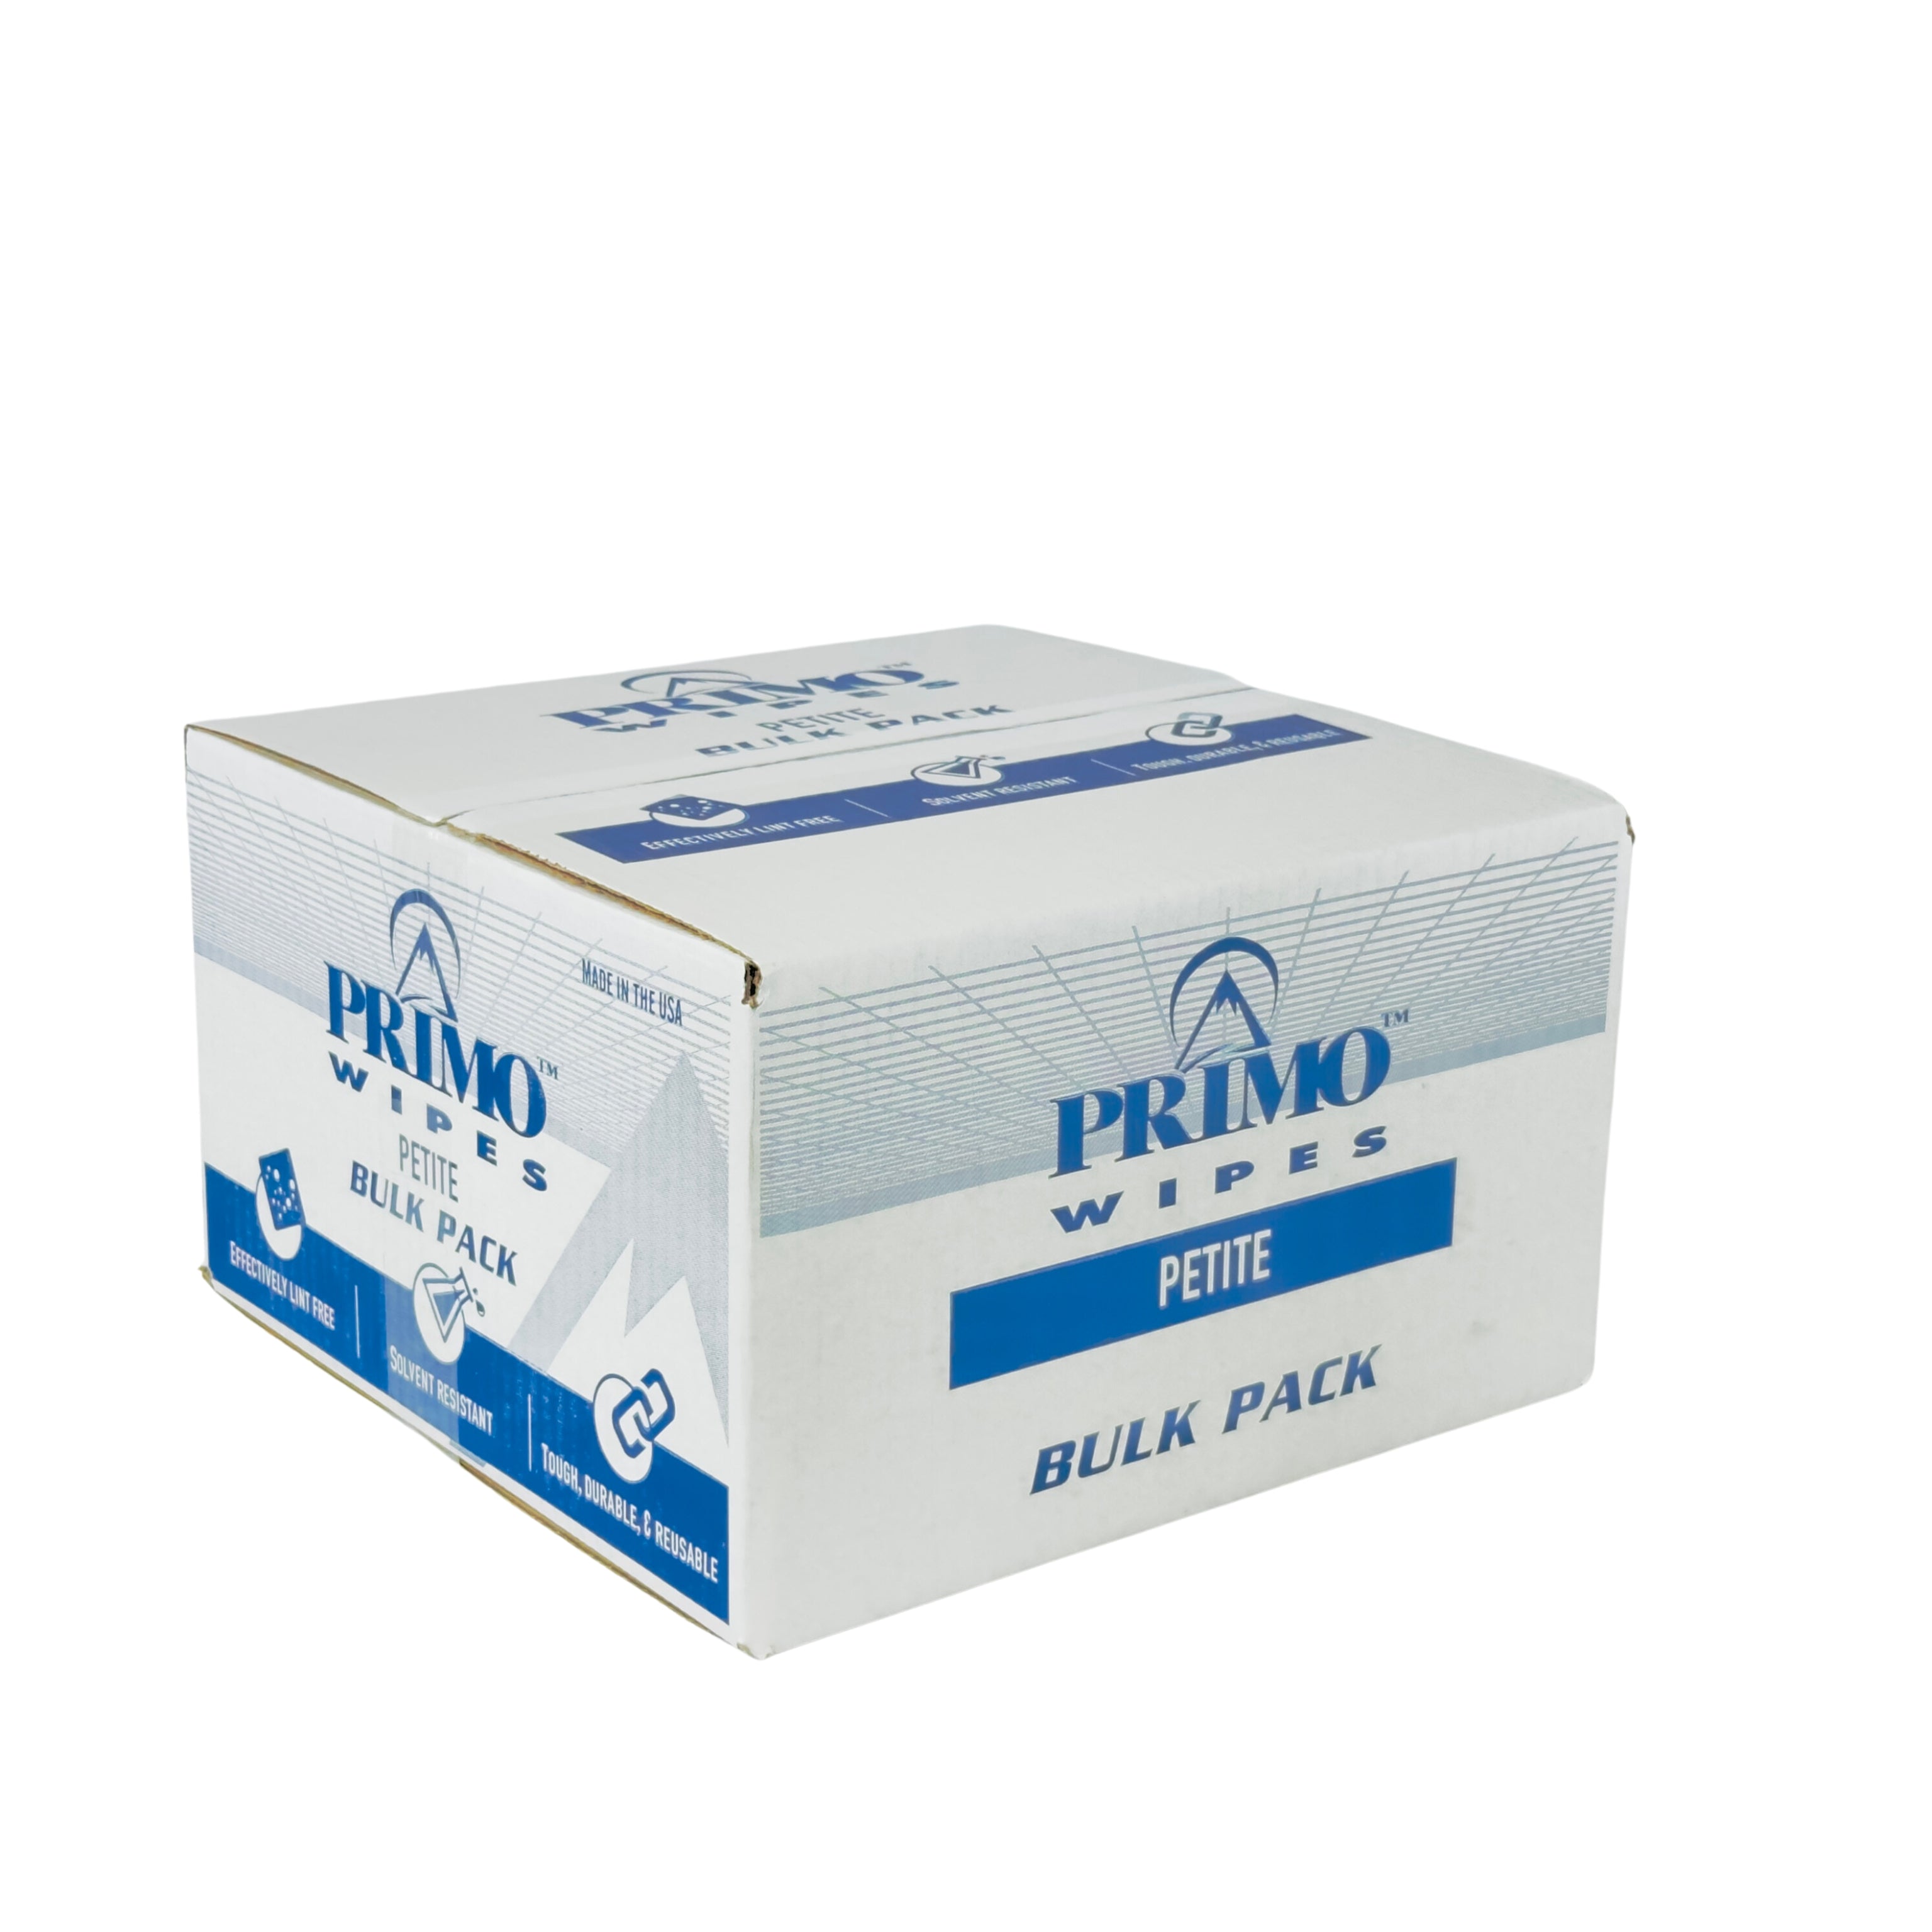 Primo® Wipes Petite Blue Shop Towels Telesto Products